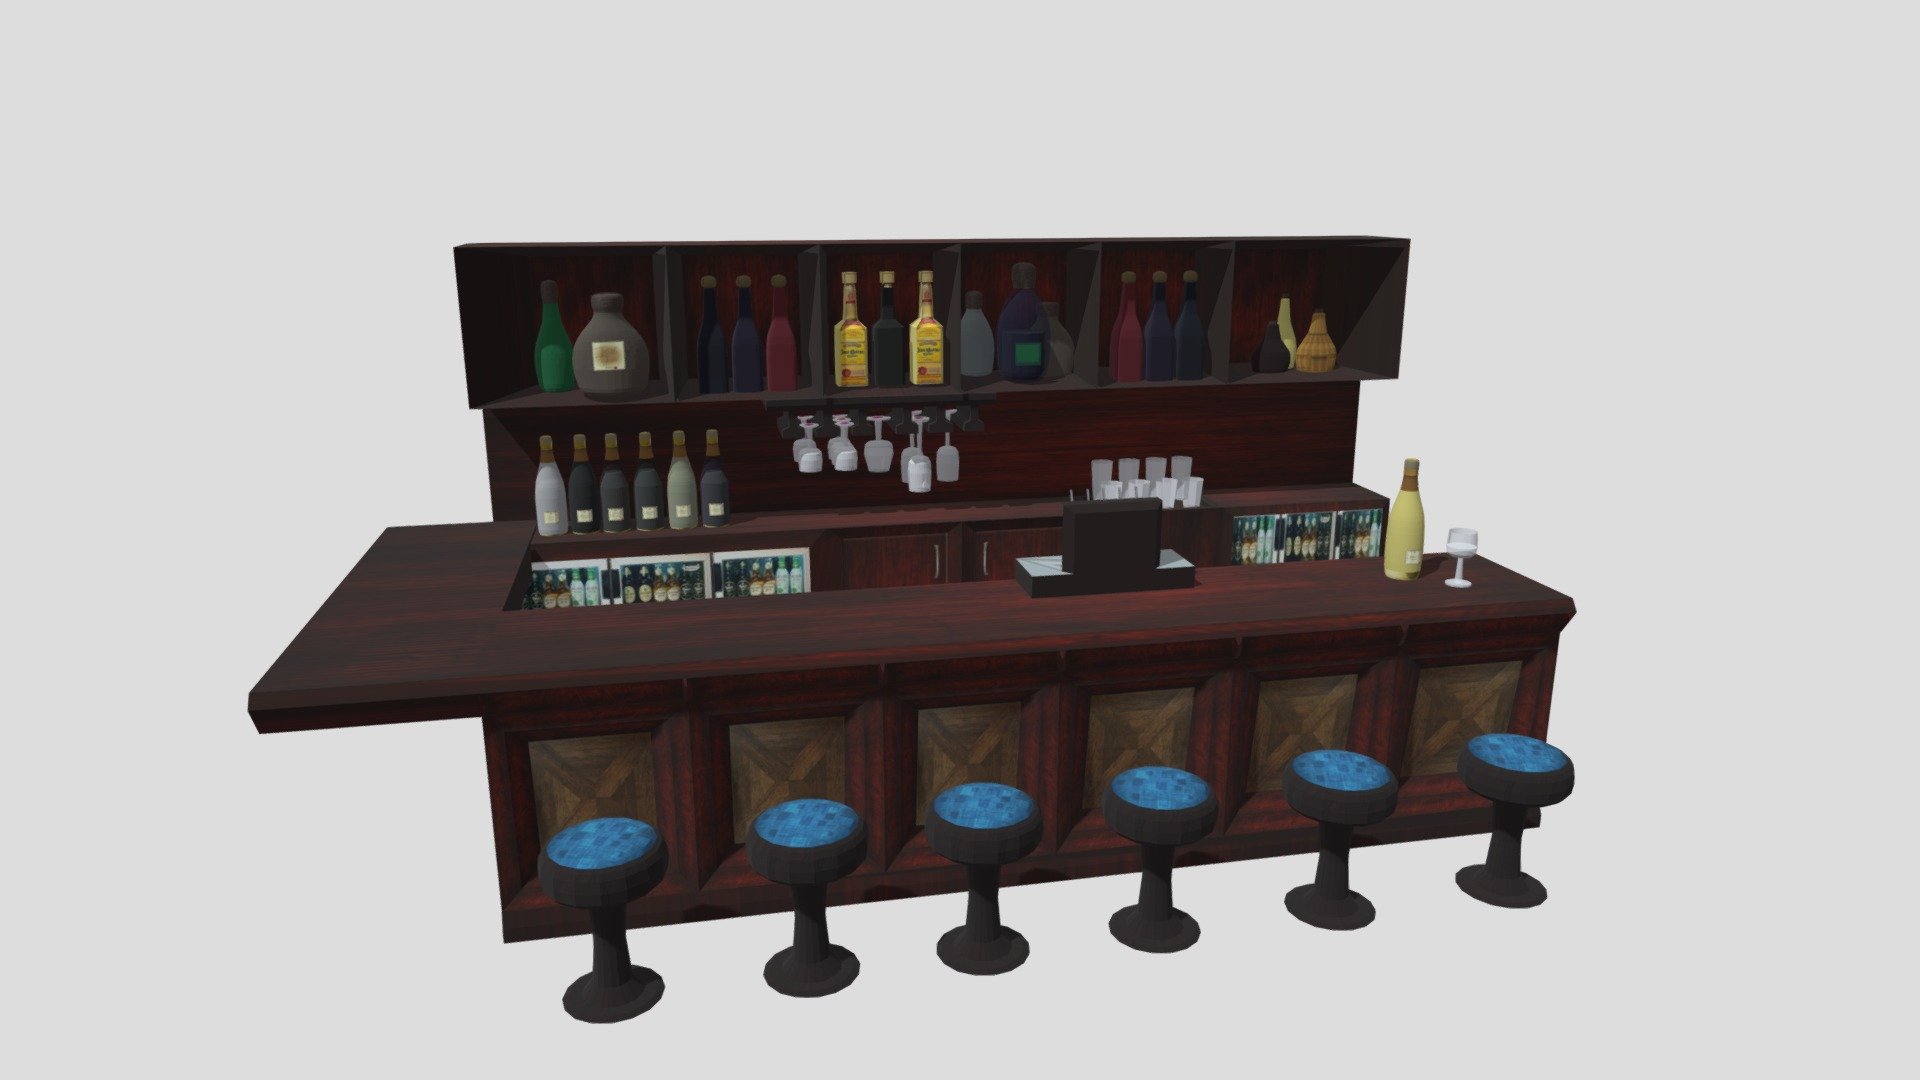 Full bar made of cherry wood - fully stocked with liquor, wine, bottles. Includes stools.

If you like it - please remember to click that LIKE button. TY - Bar - Stocked - Buy Royalty Free 3D model by EvieMarie (@yvonne.debandi) 3d model